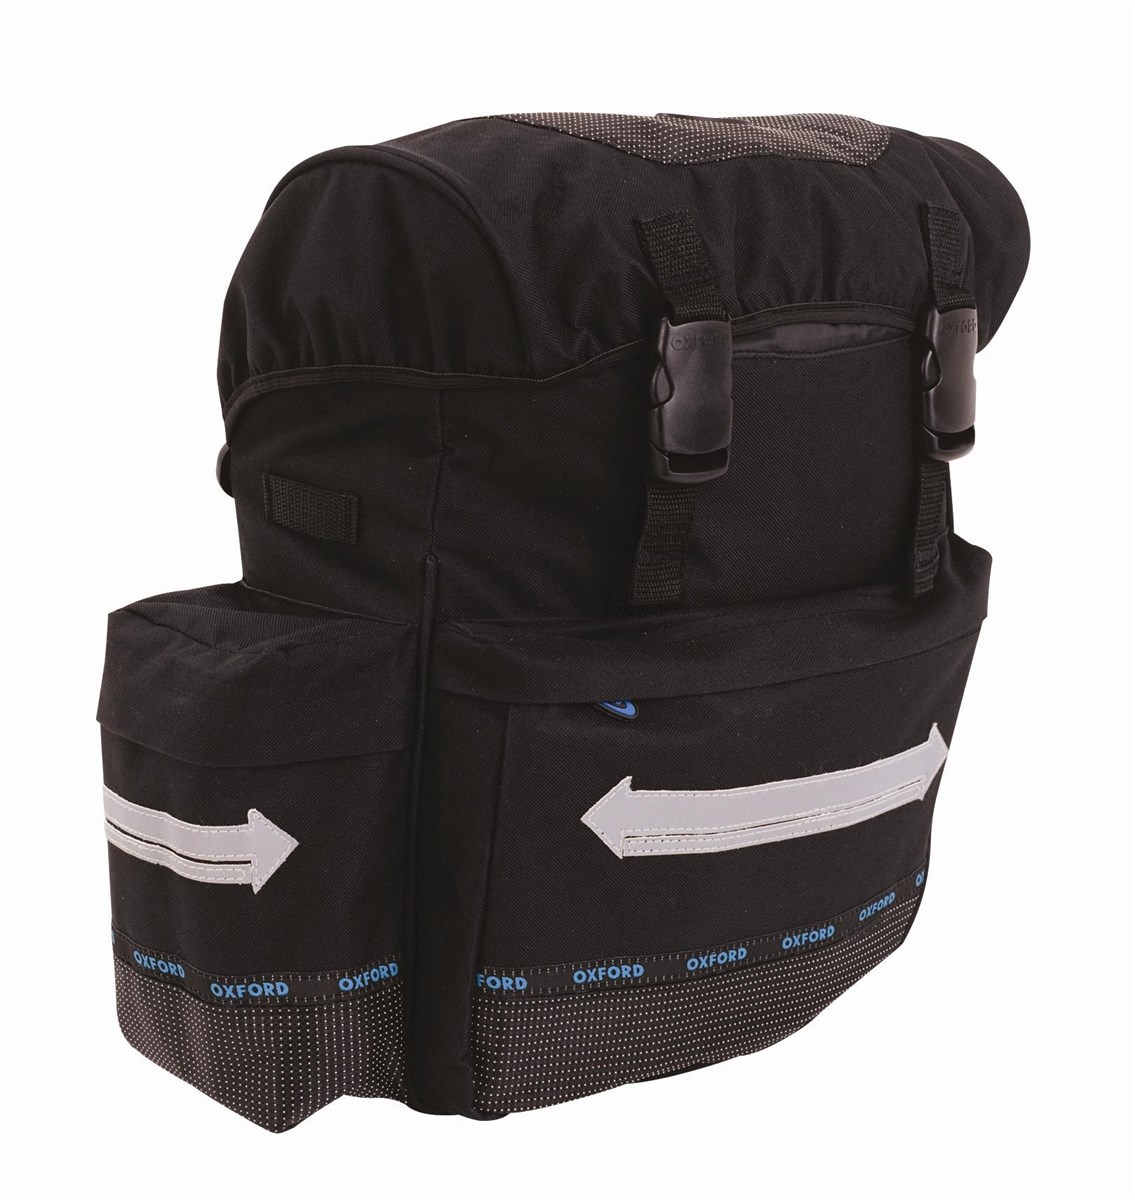 Oxford Double Rear Panniers product image